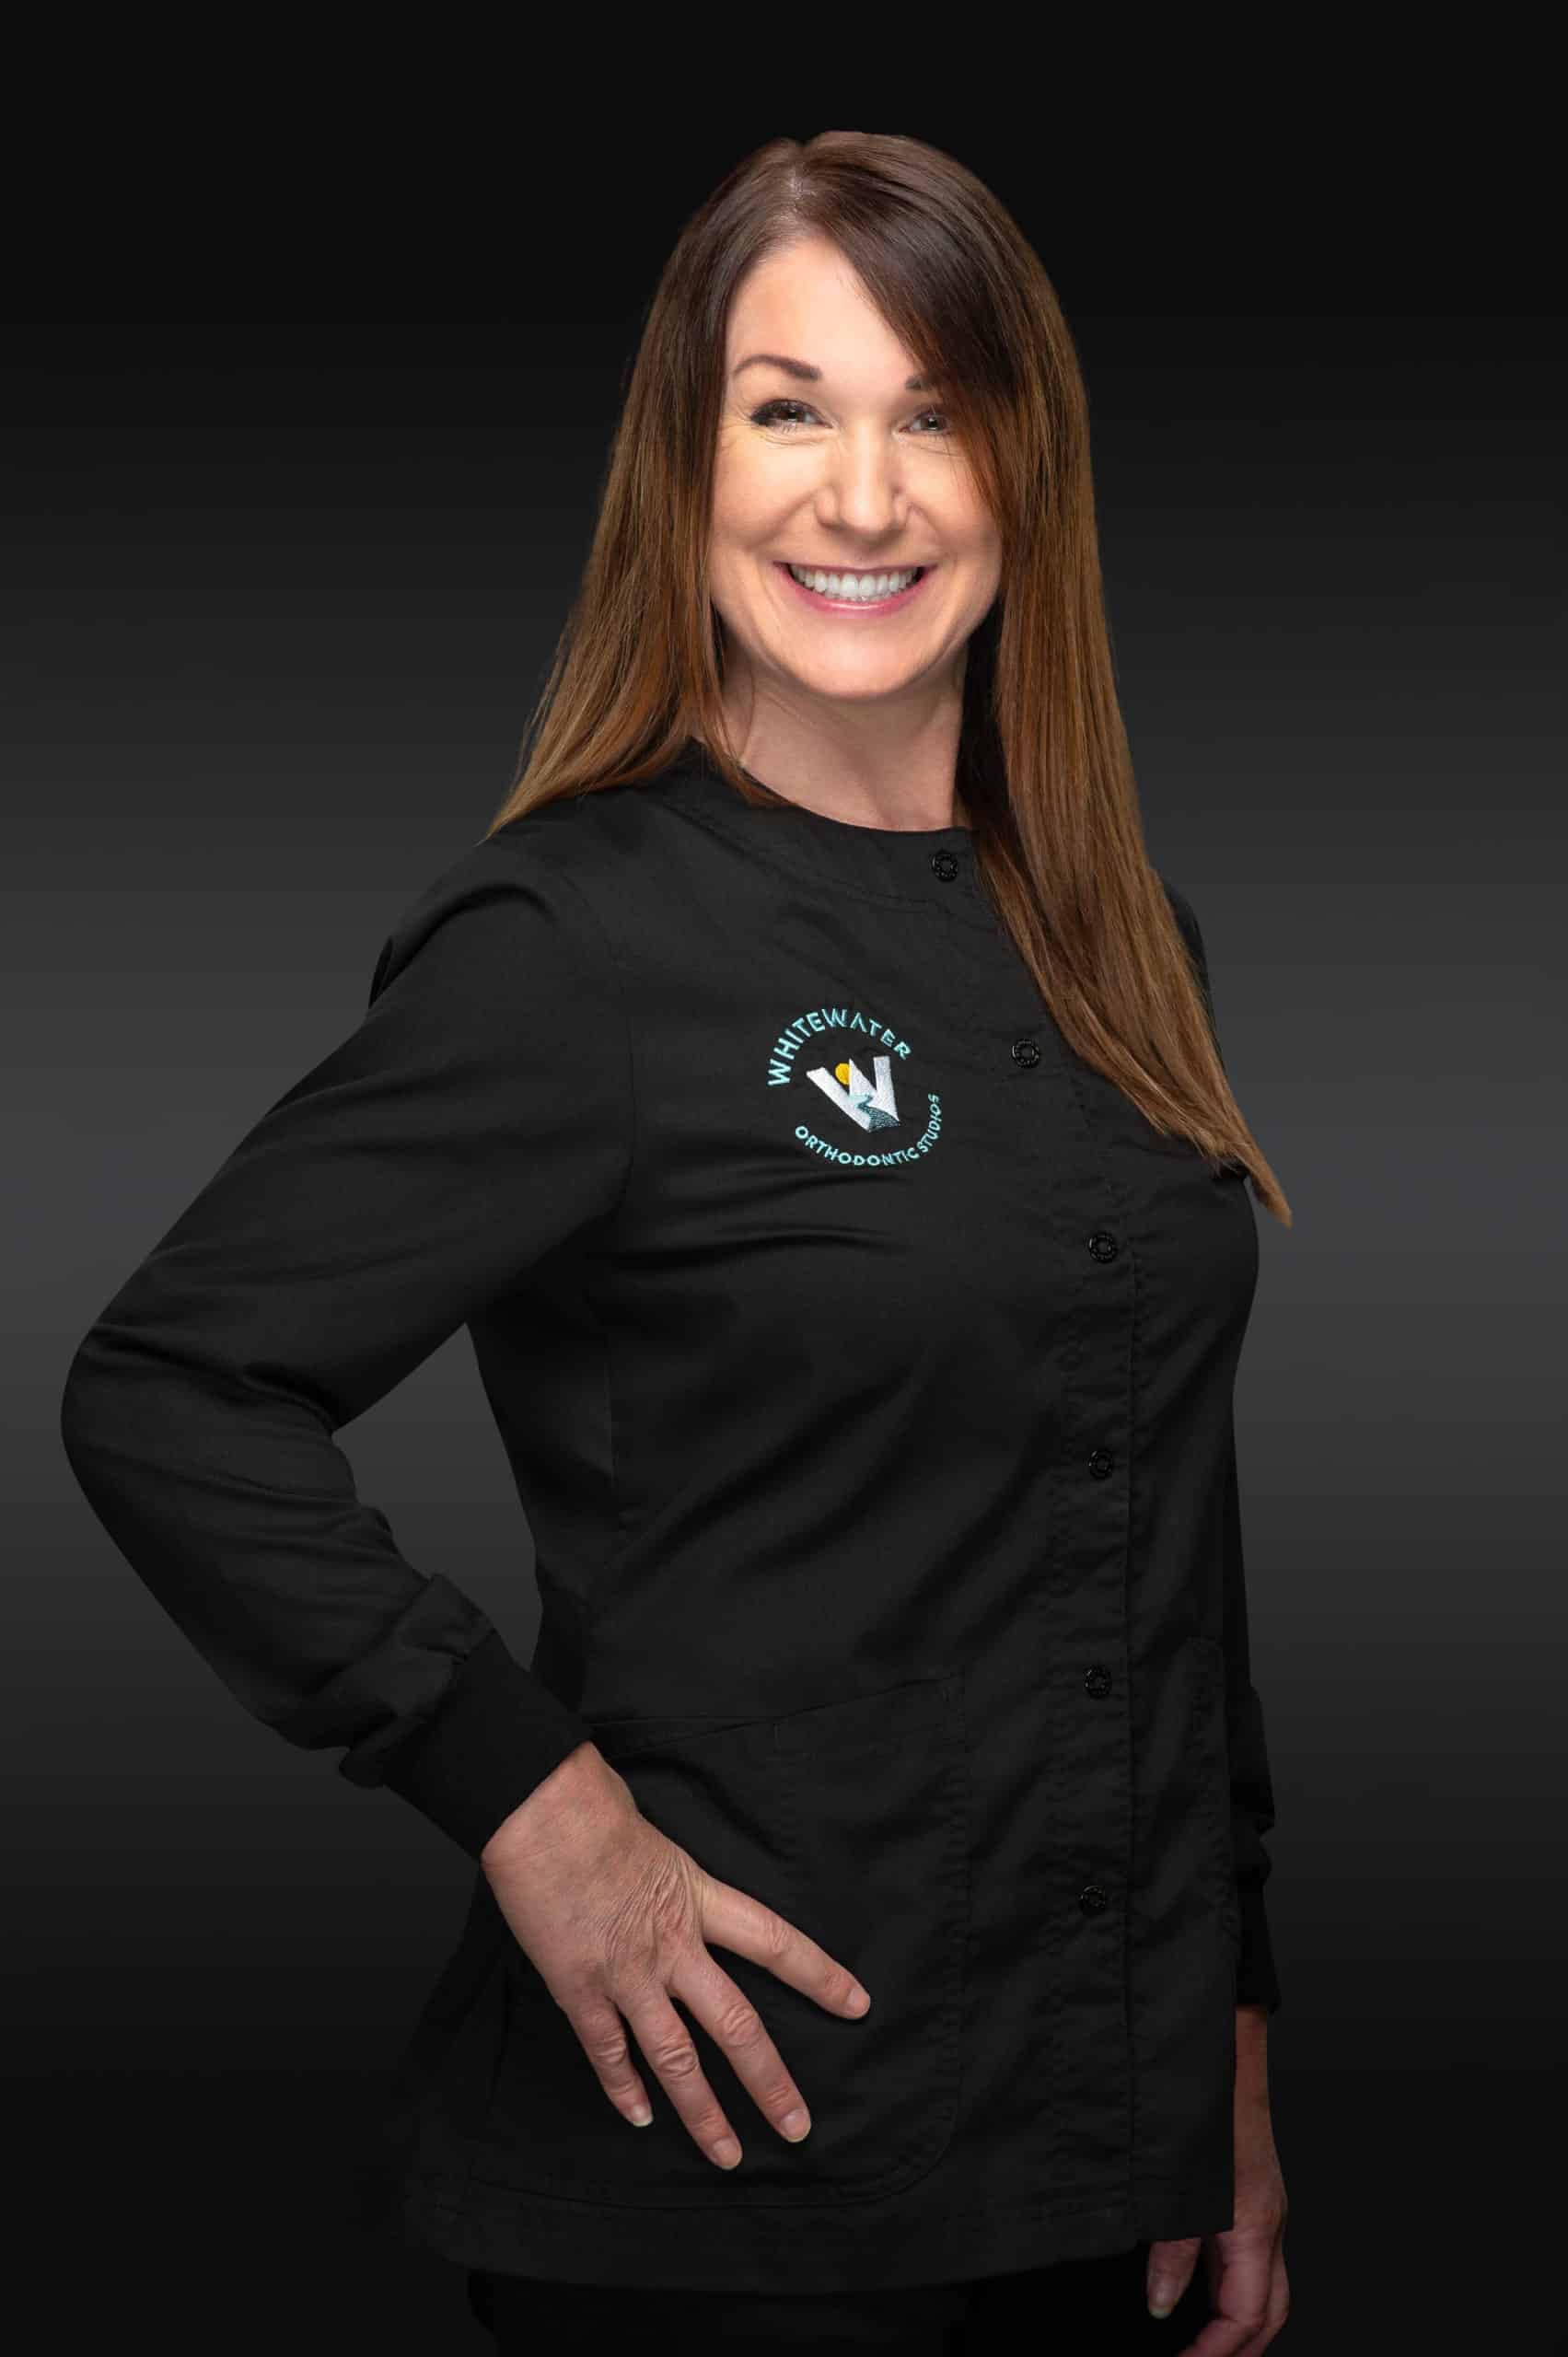 Staff Whitewater Orthodontic Studios in Yelm and Tacoma, WA